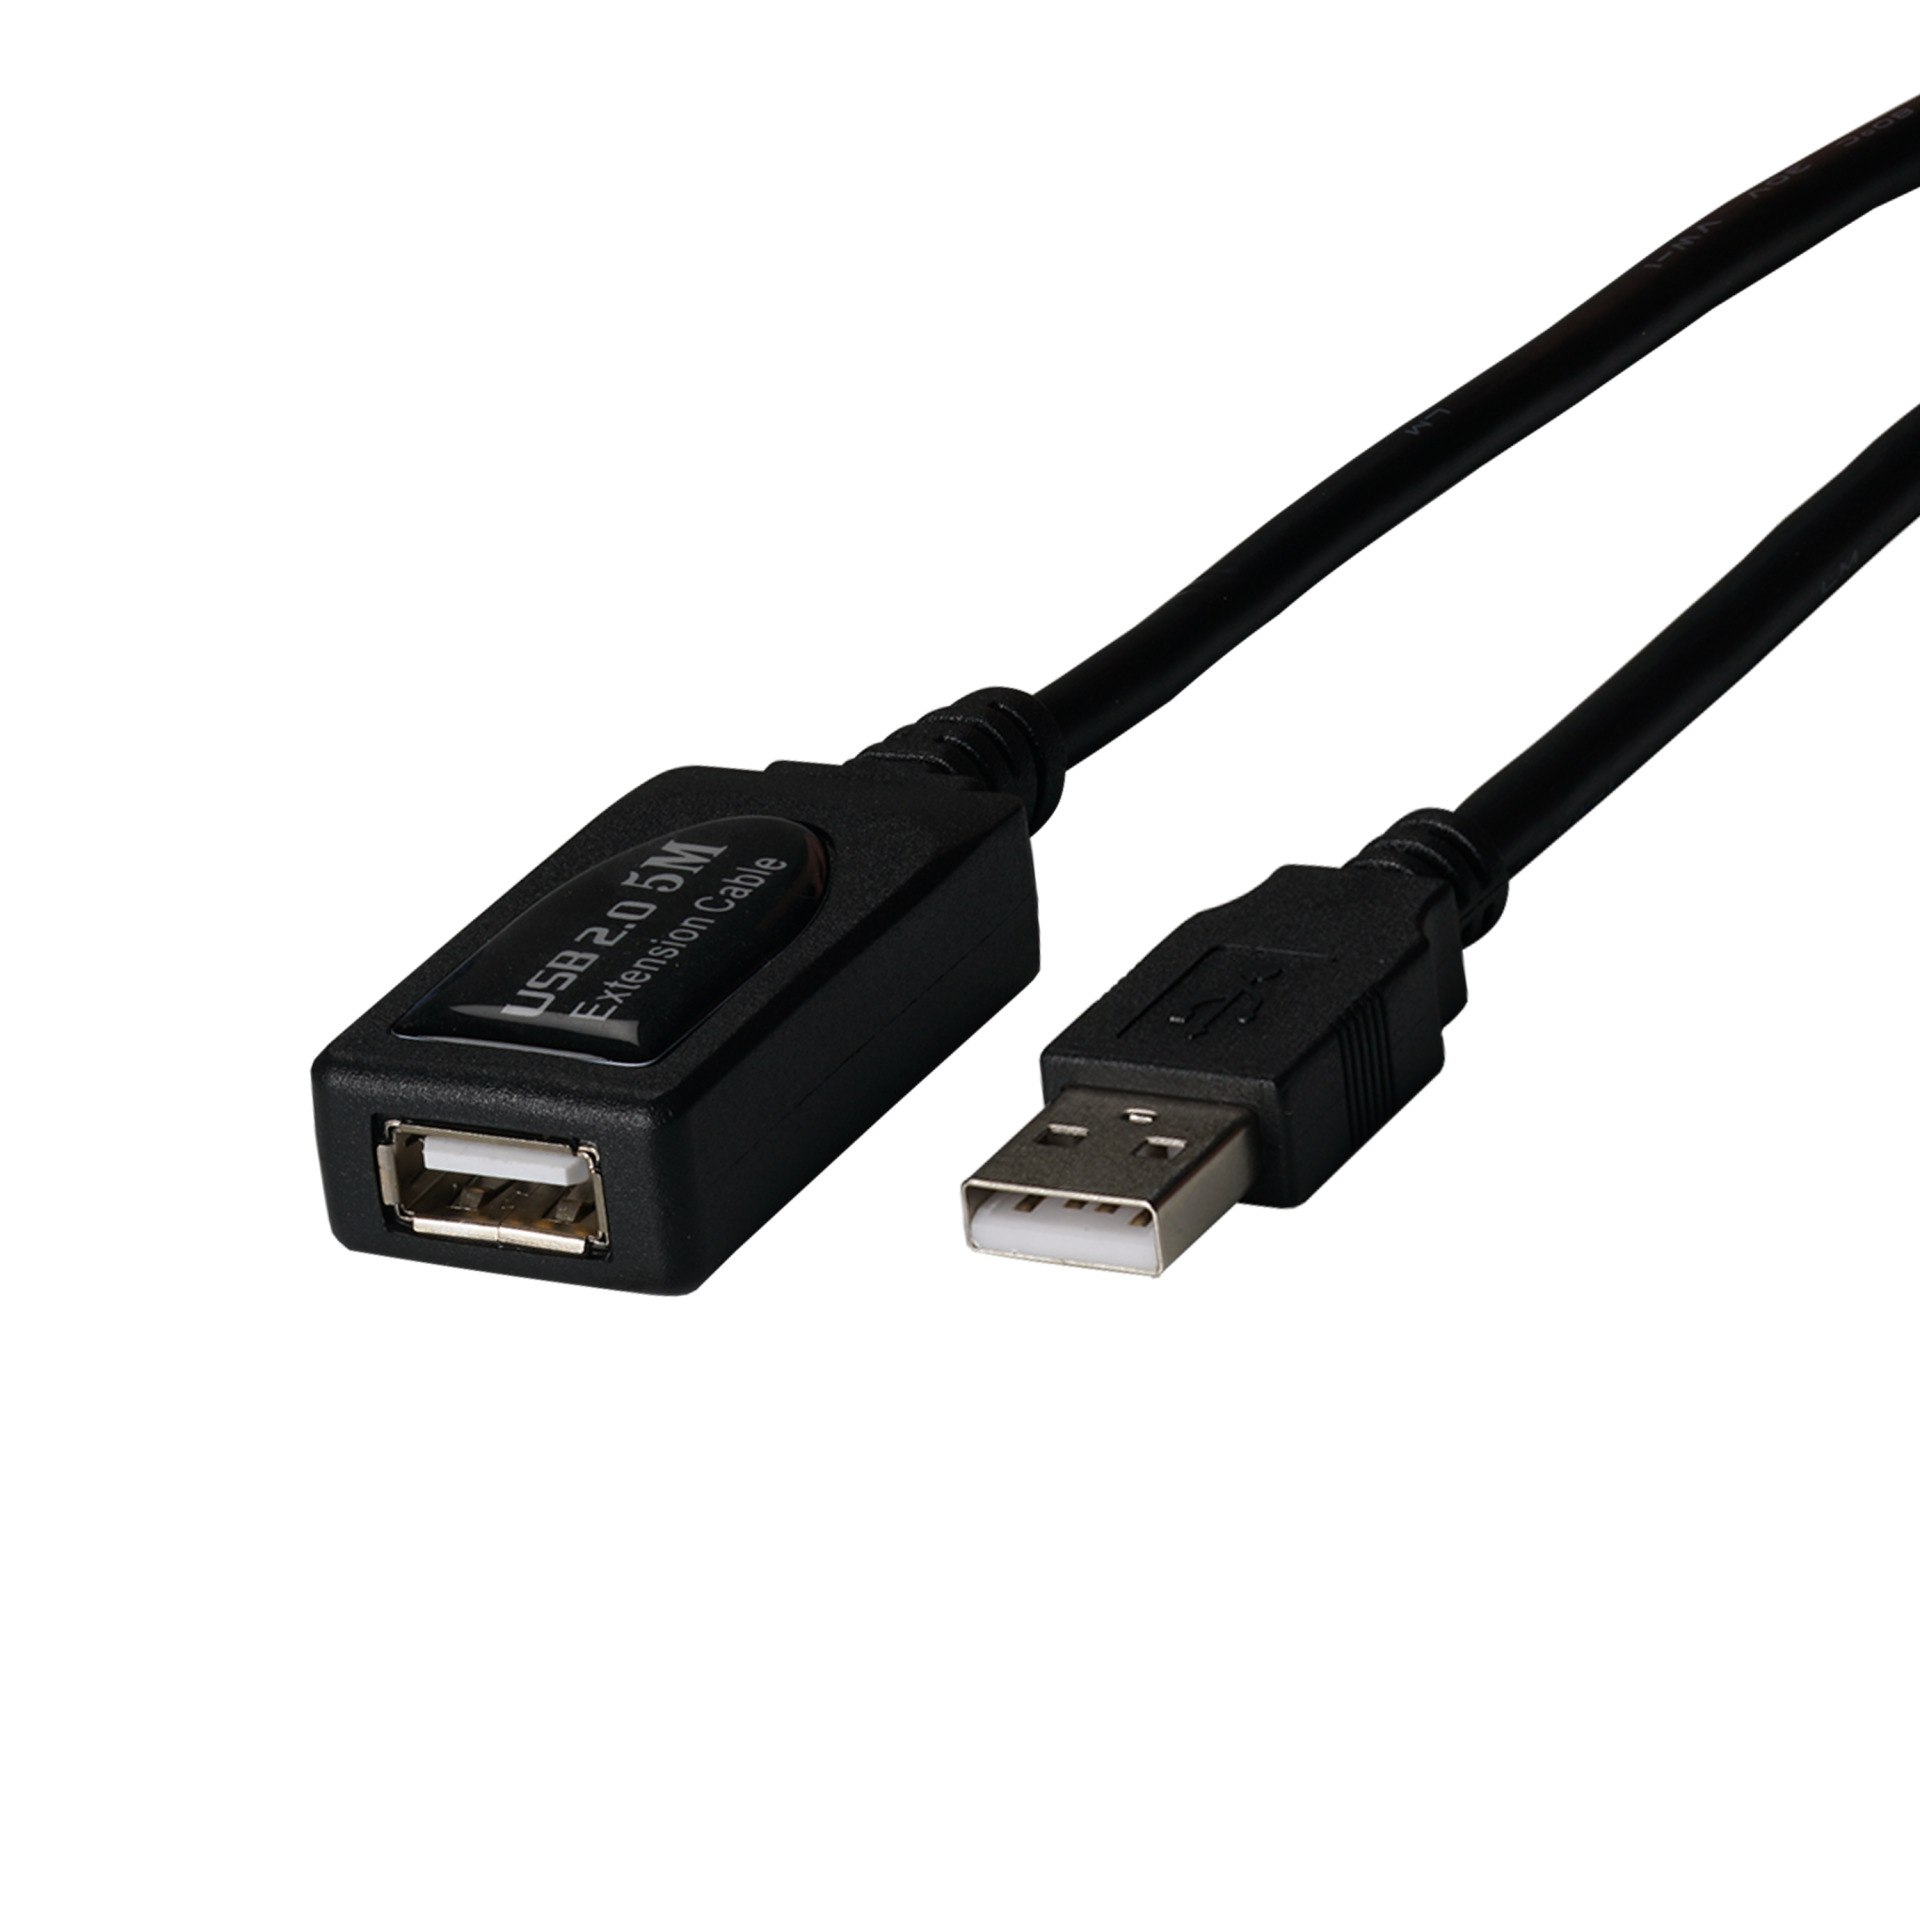 USB2.0 Repeater Cable 5m active, USB-A Jack to USB-A Plug